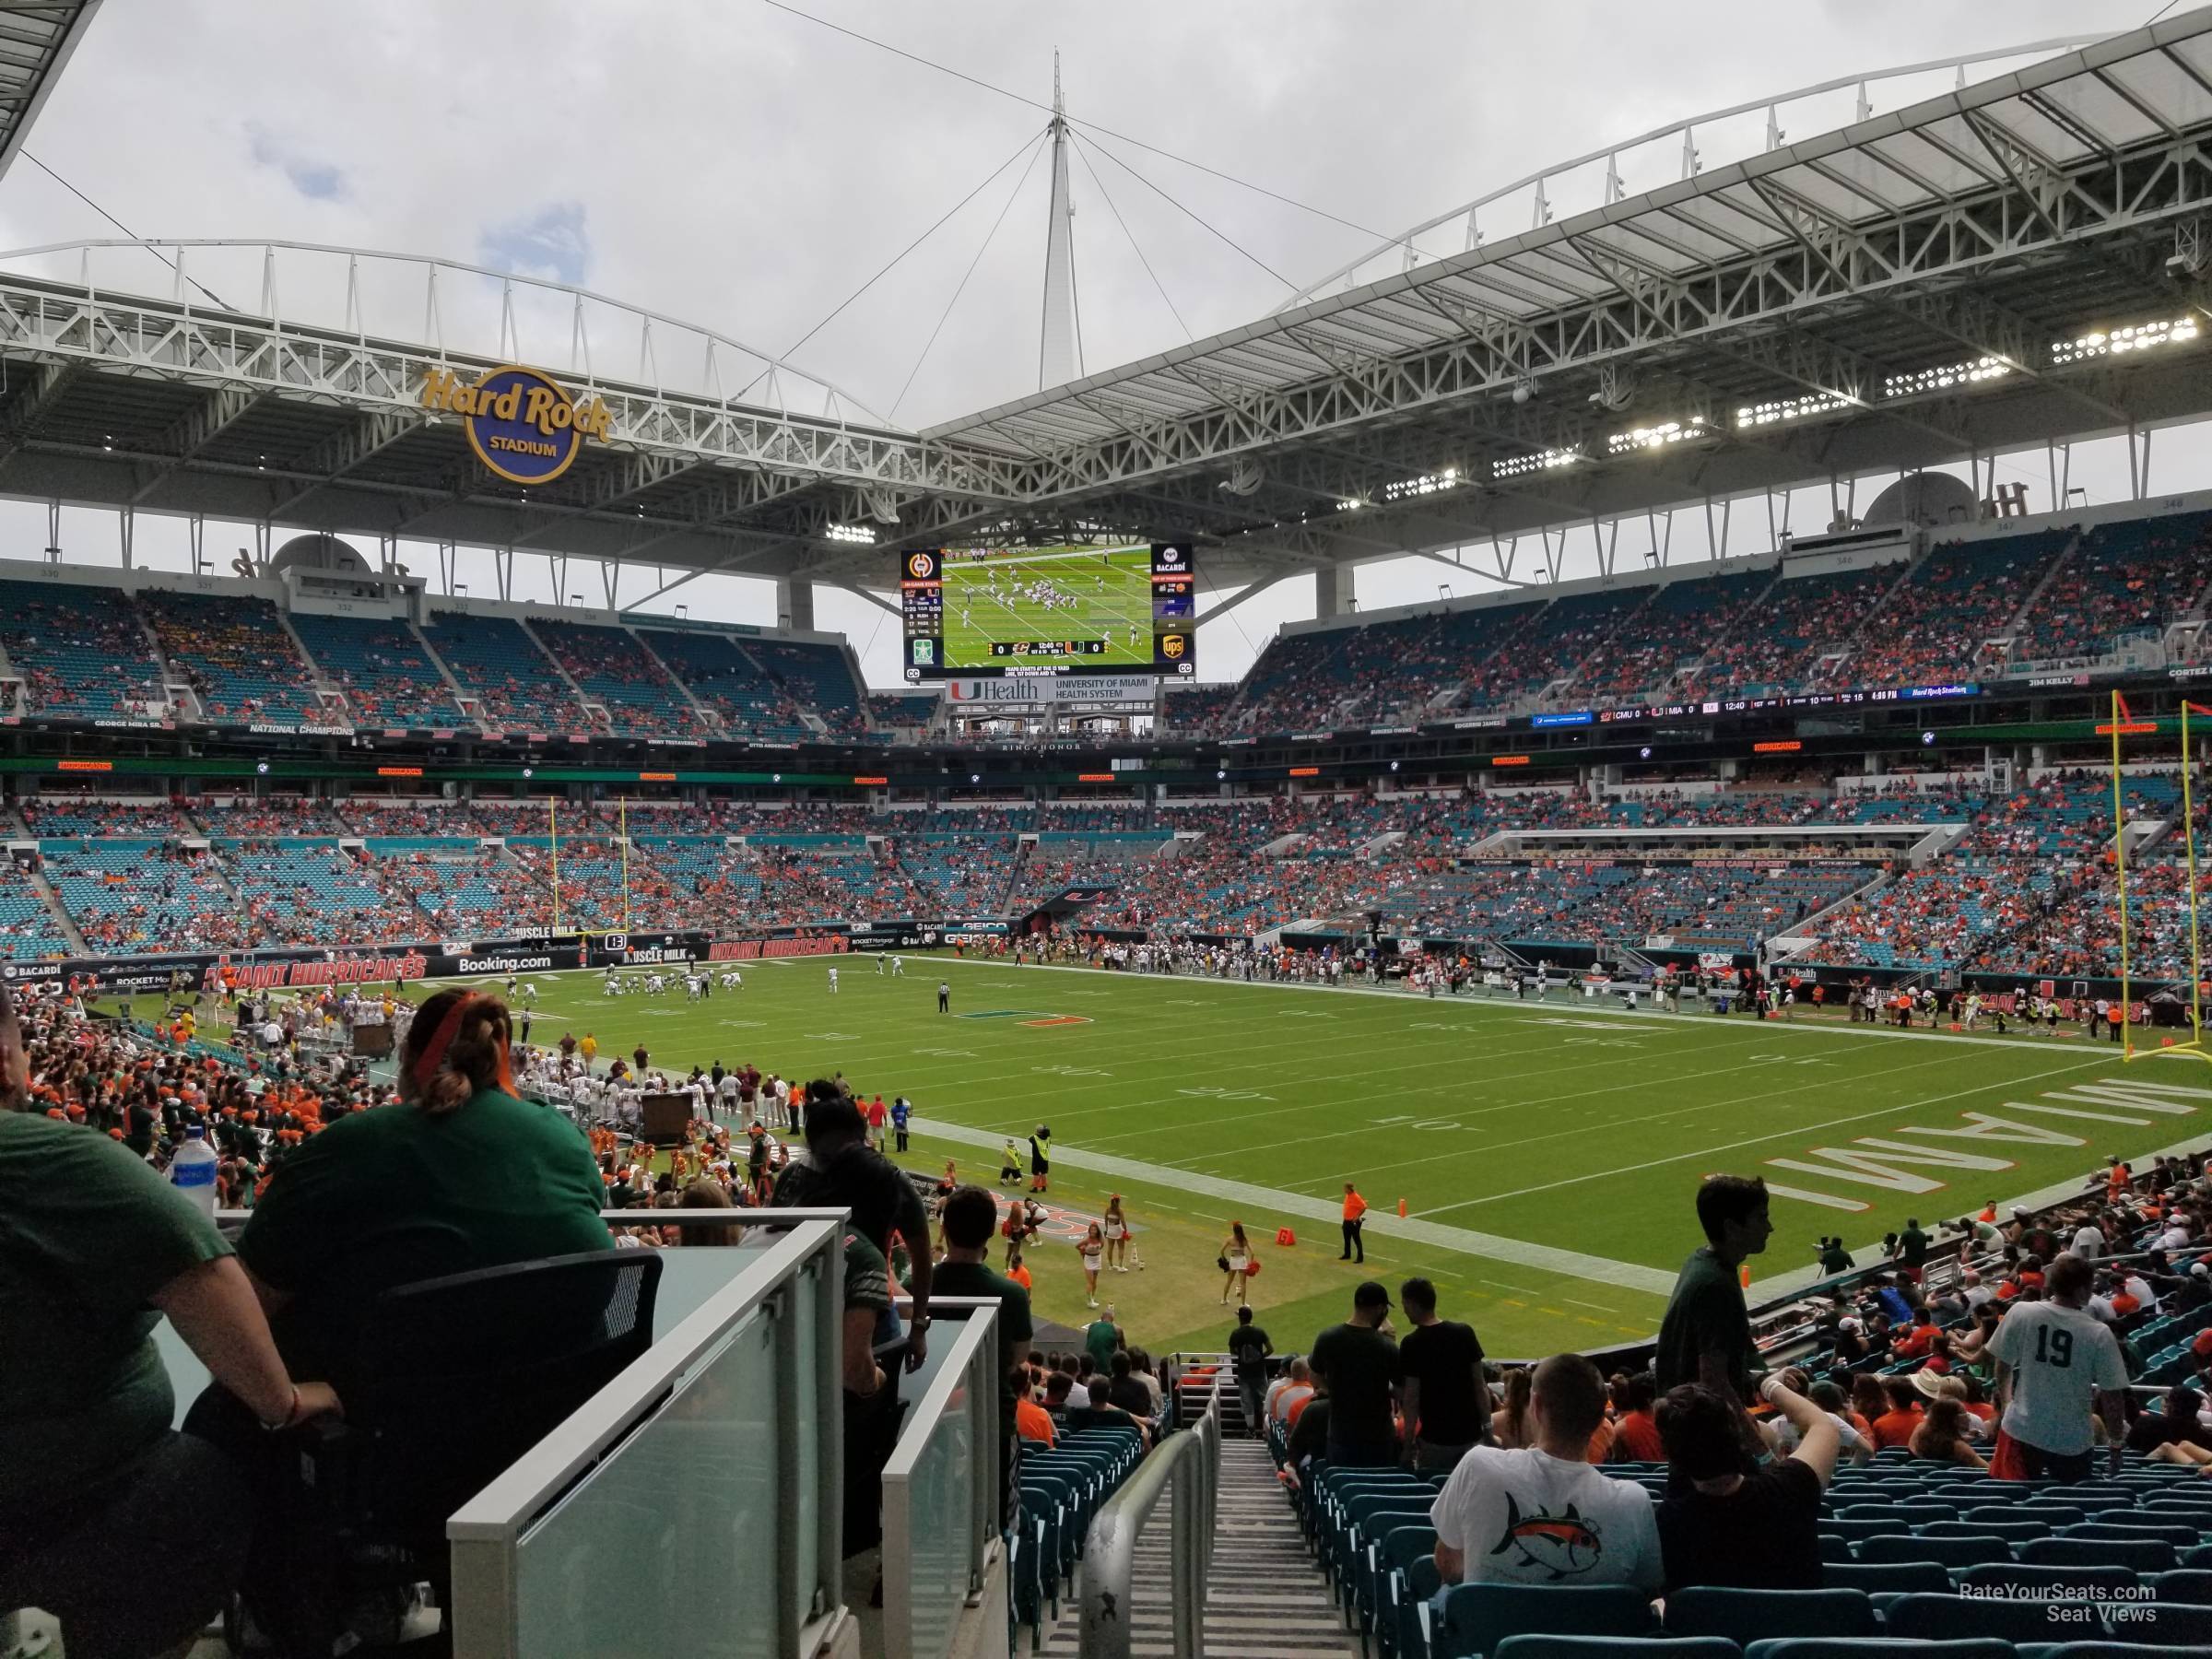 section 110 at hard rock stadium - miami dolphins